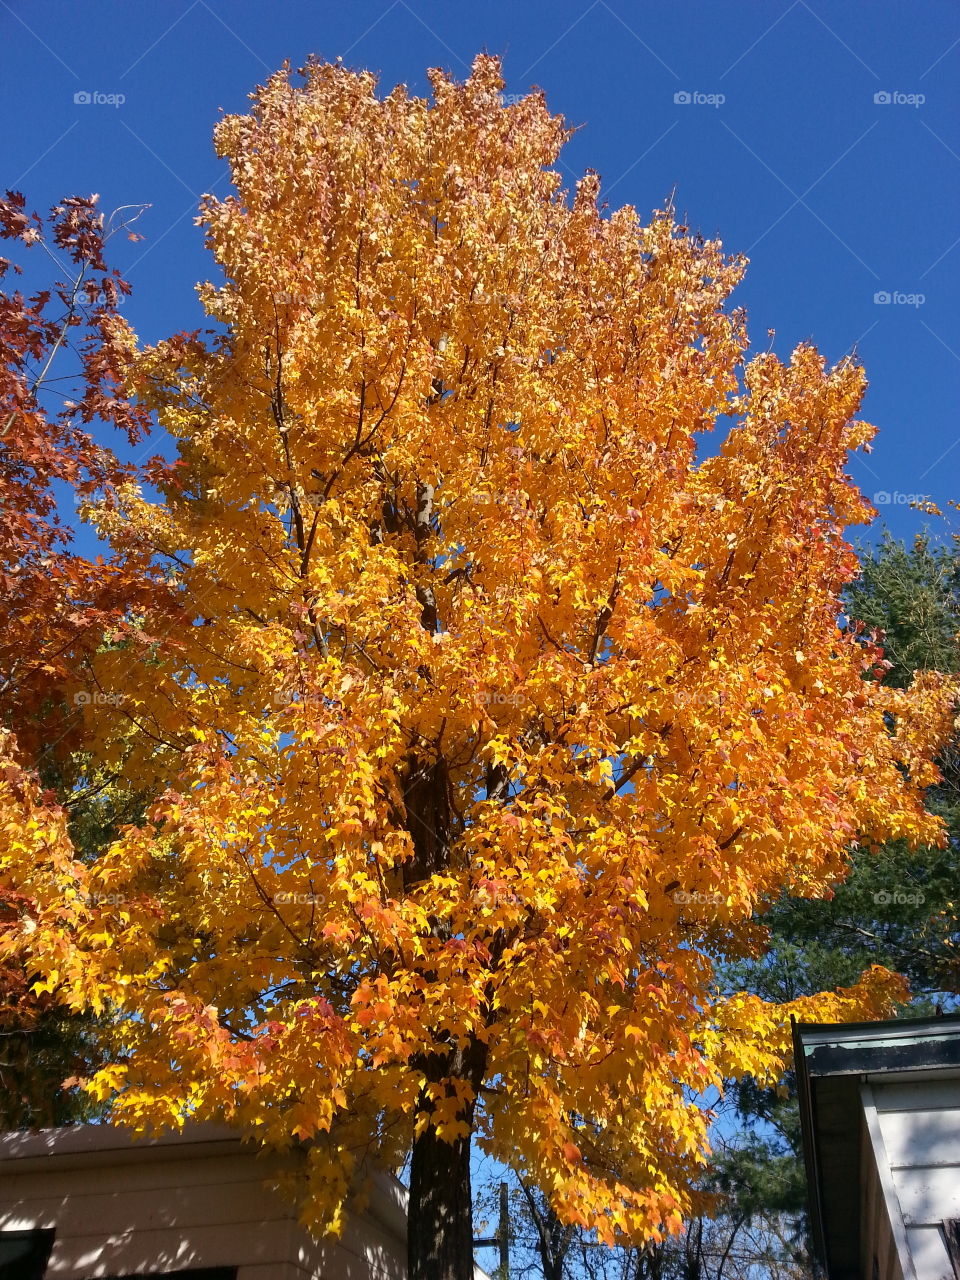 fall colors. tree of fire.